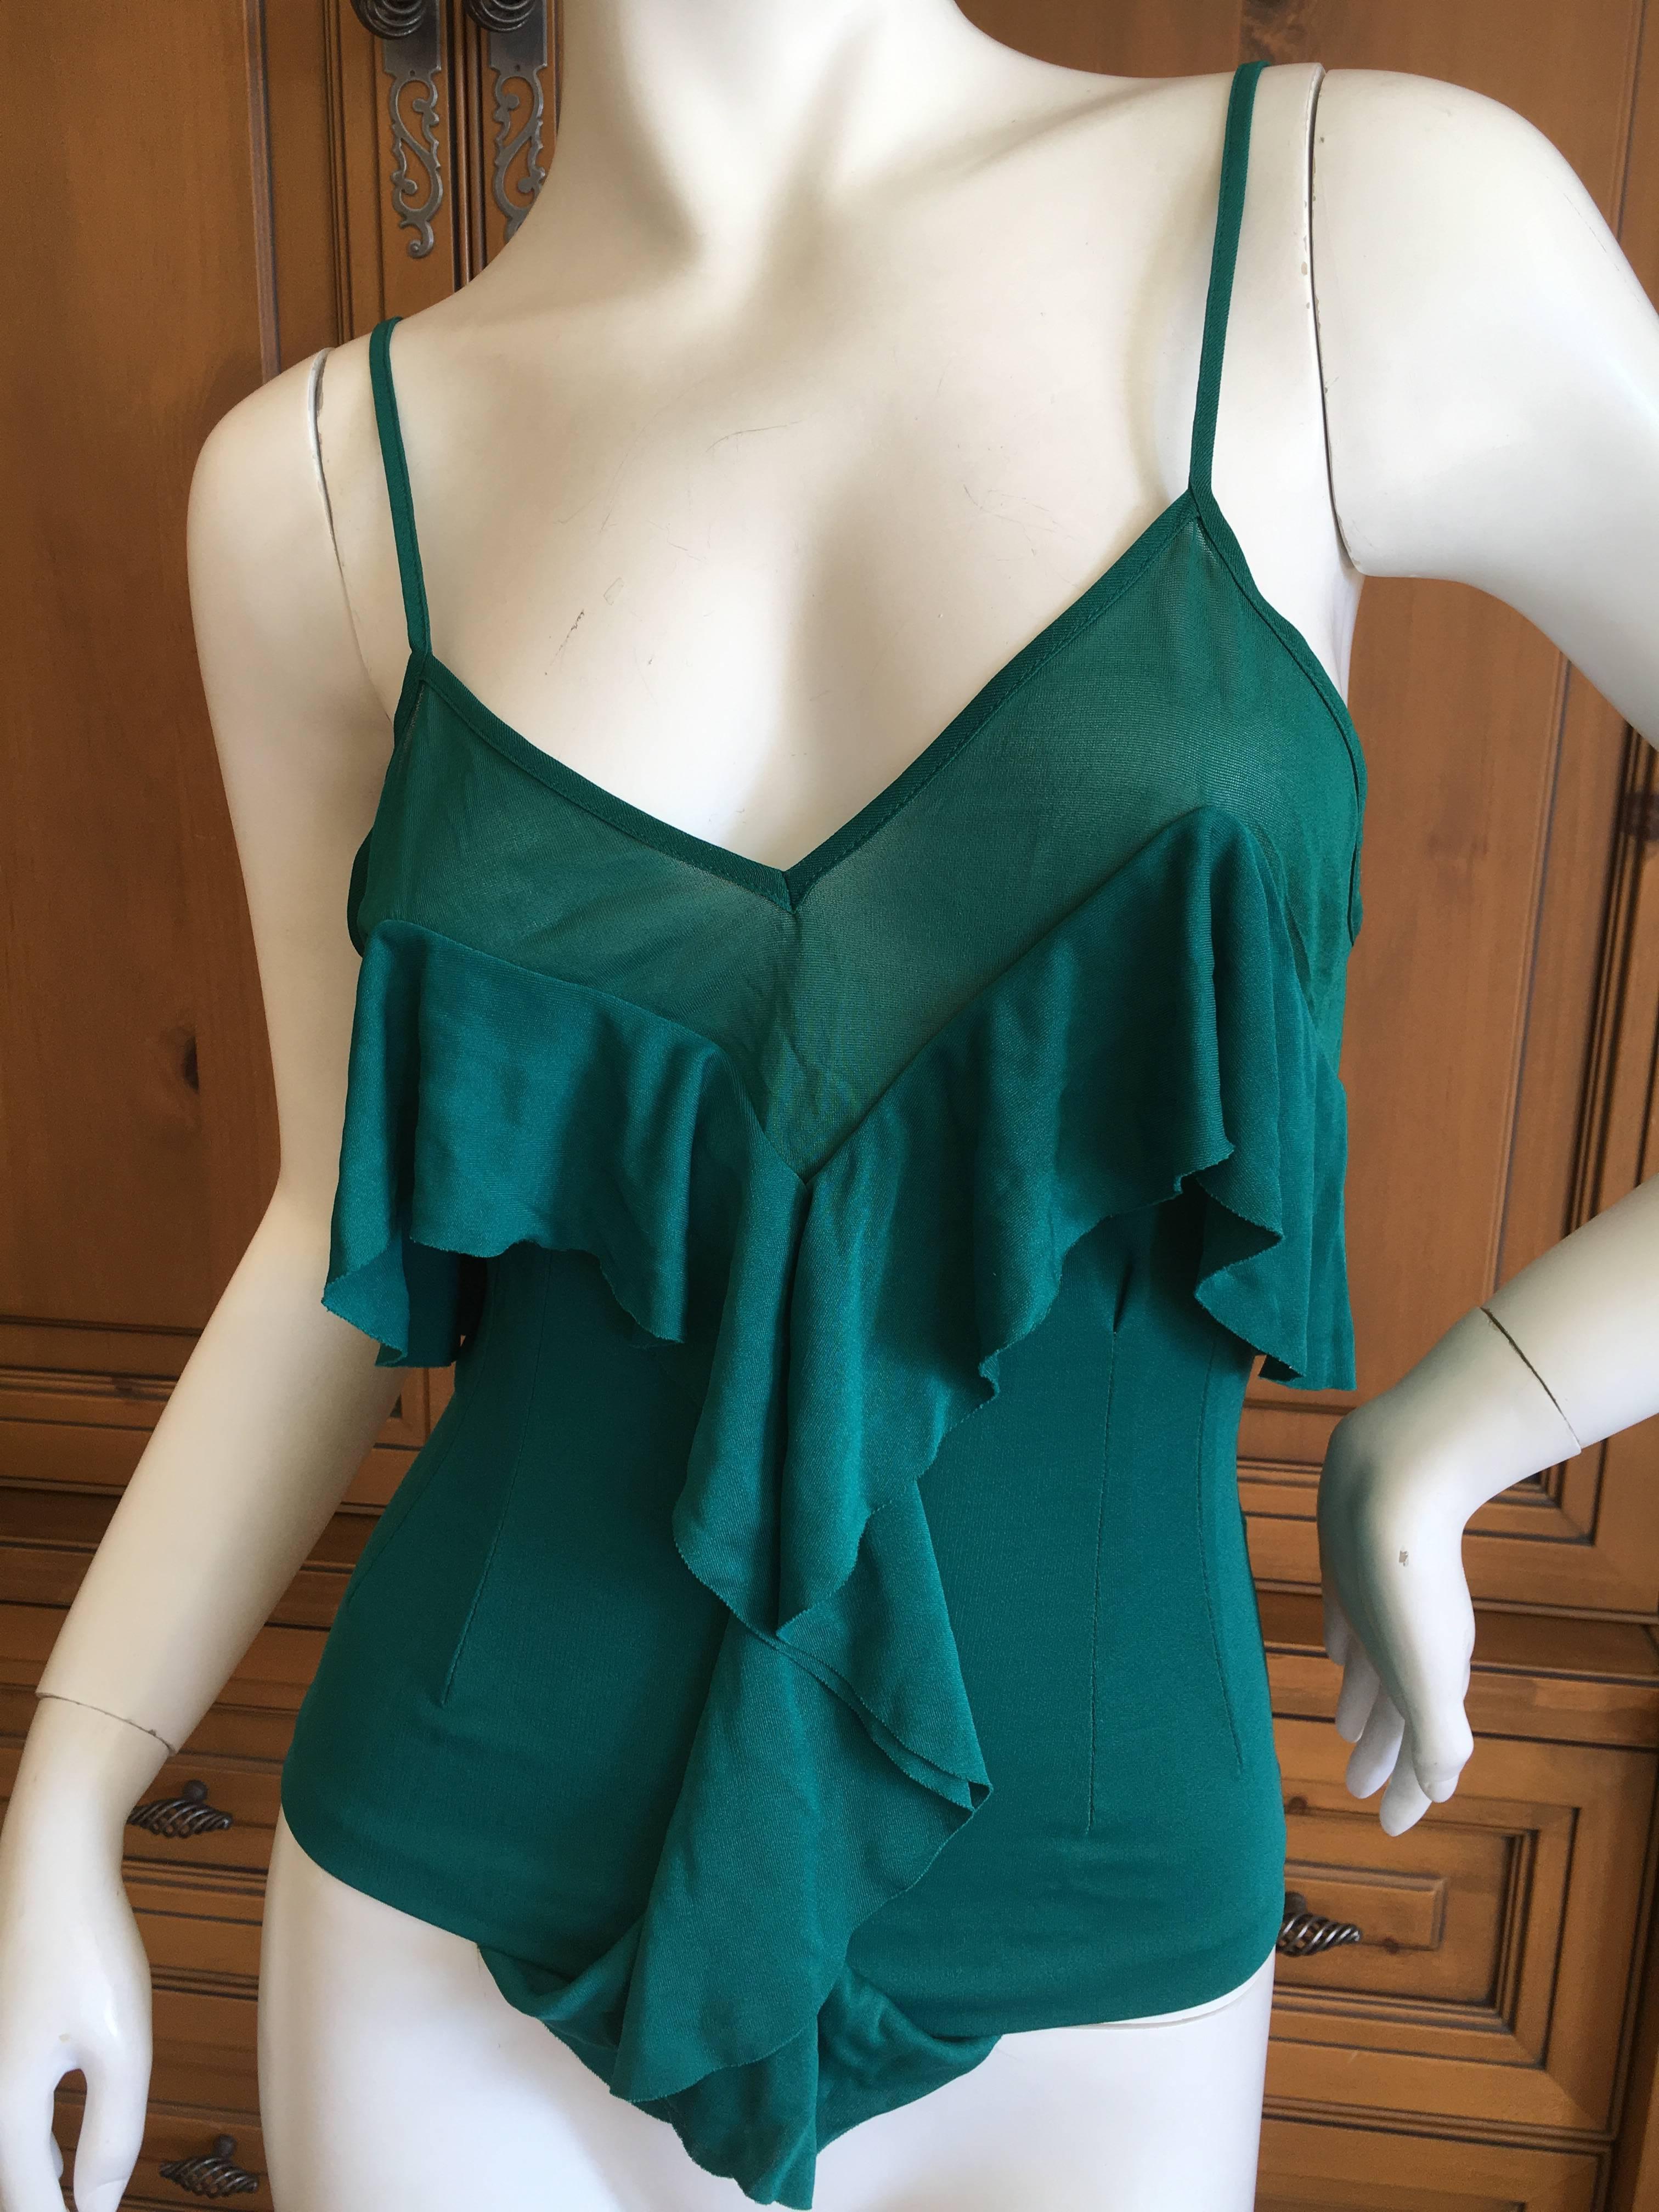 Yves Saint Laurent Fall 2003 by Tom Ford Green Silk Ruffle Top New with Tags 1